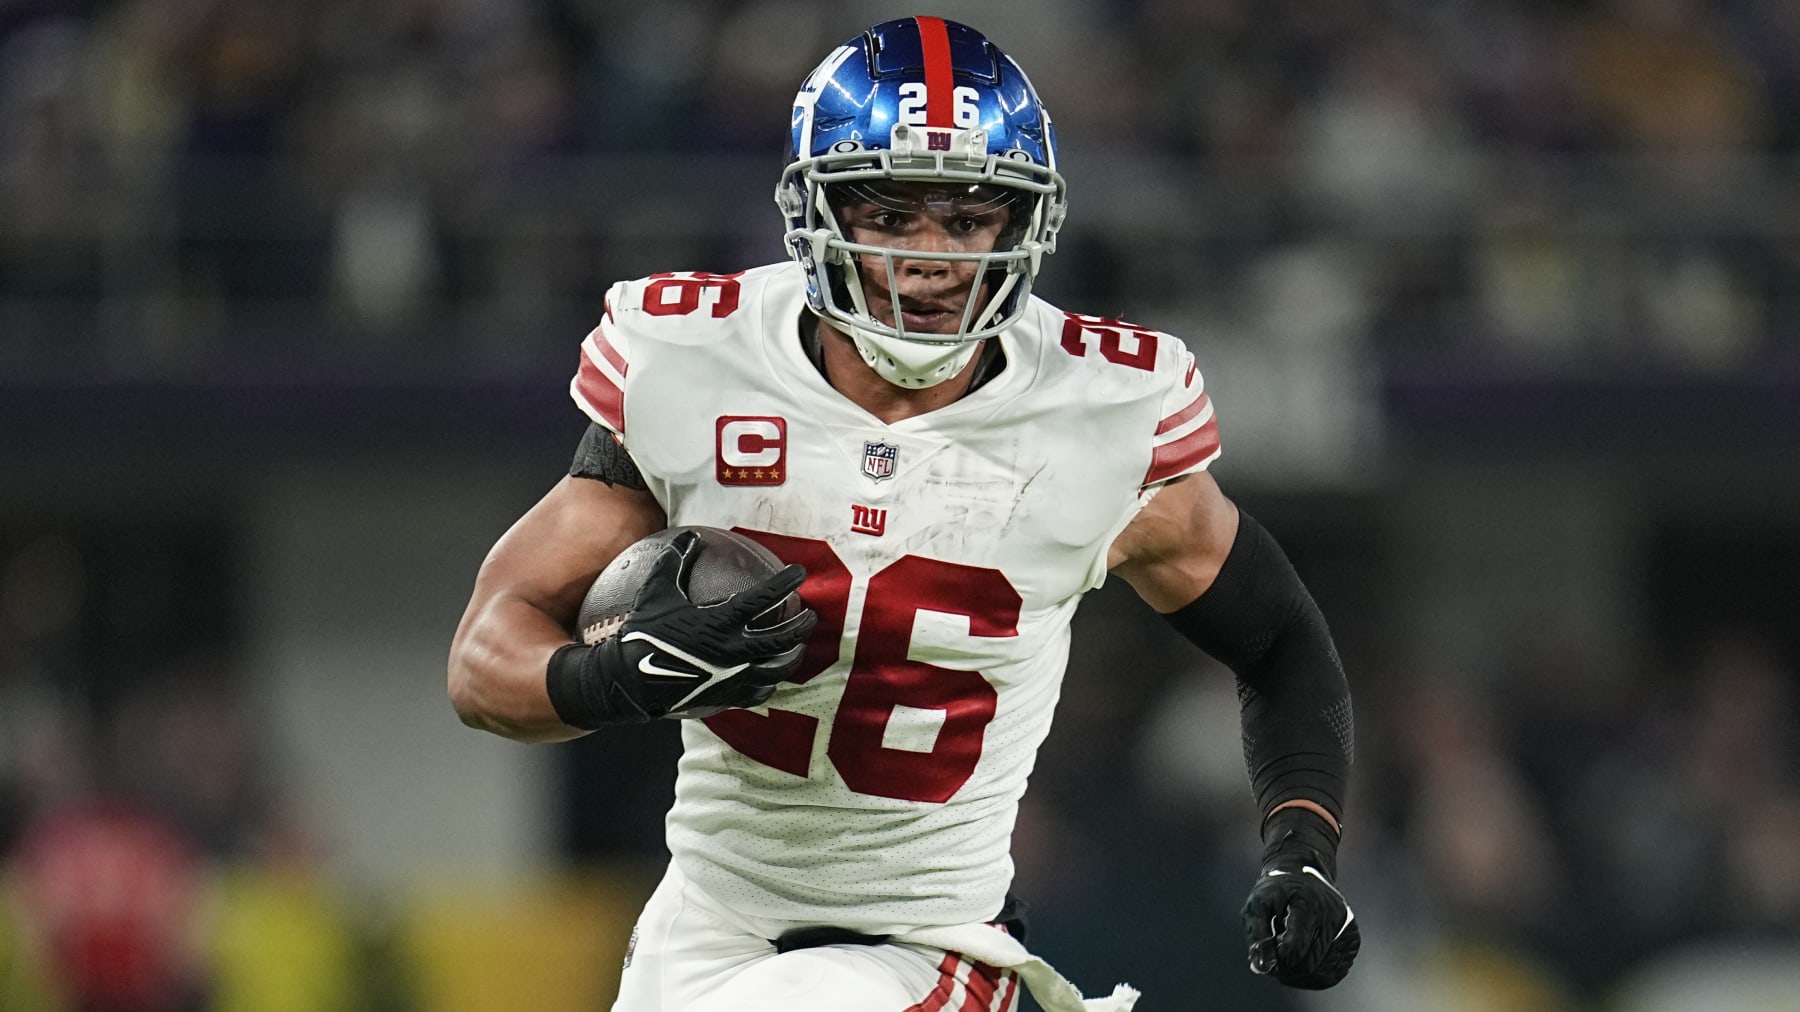 NFL Shakeup: How Saquon Barkley's Big Move to Eagles Stirs Up Drama and Excitement